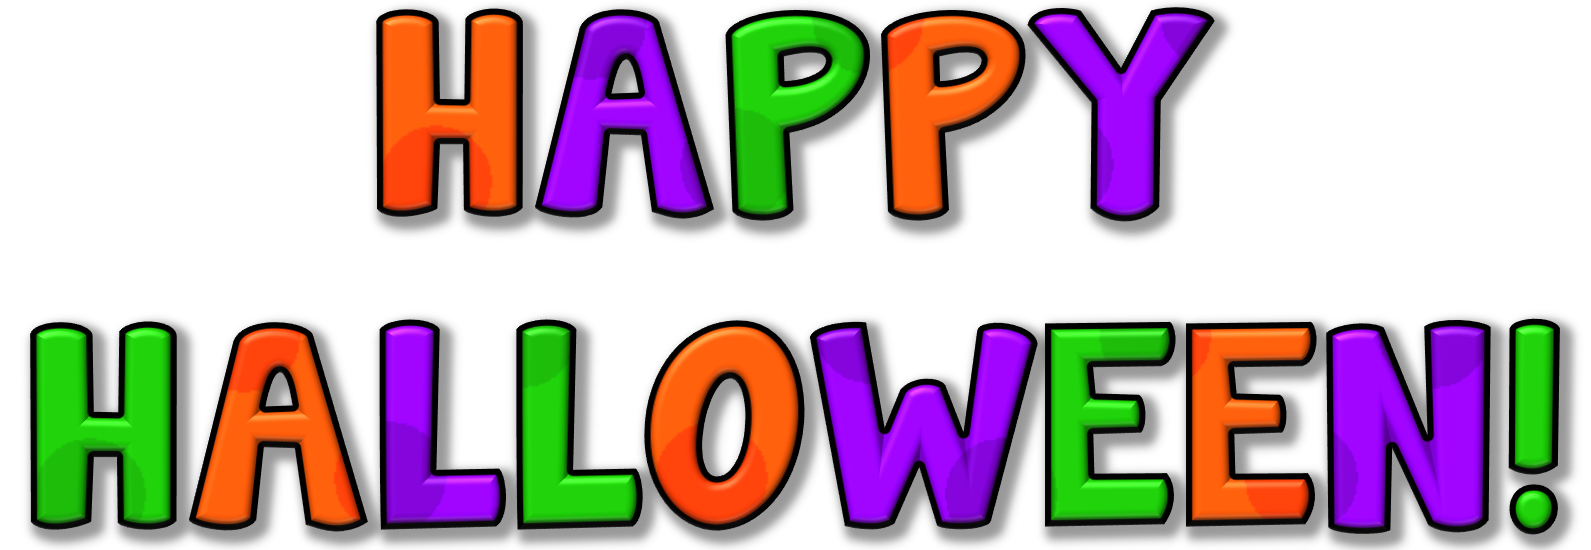 Happy Halloween Clipart | Clipart Panda - Free Clipart Images